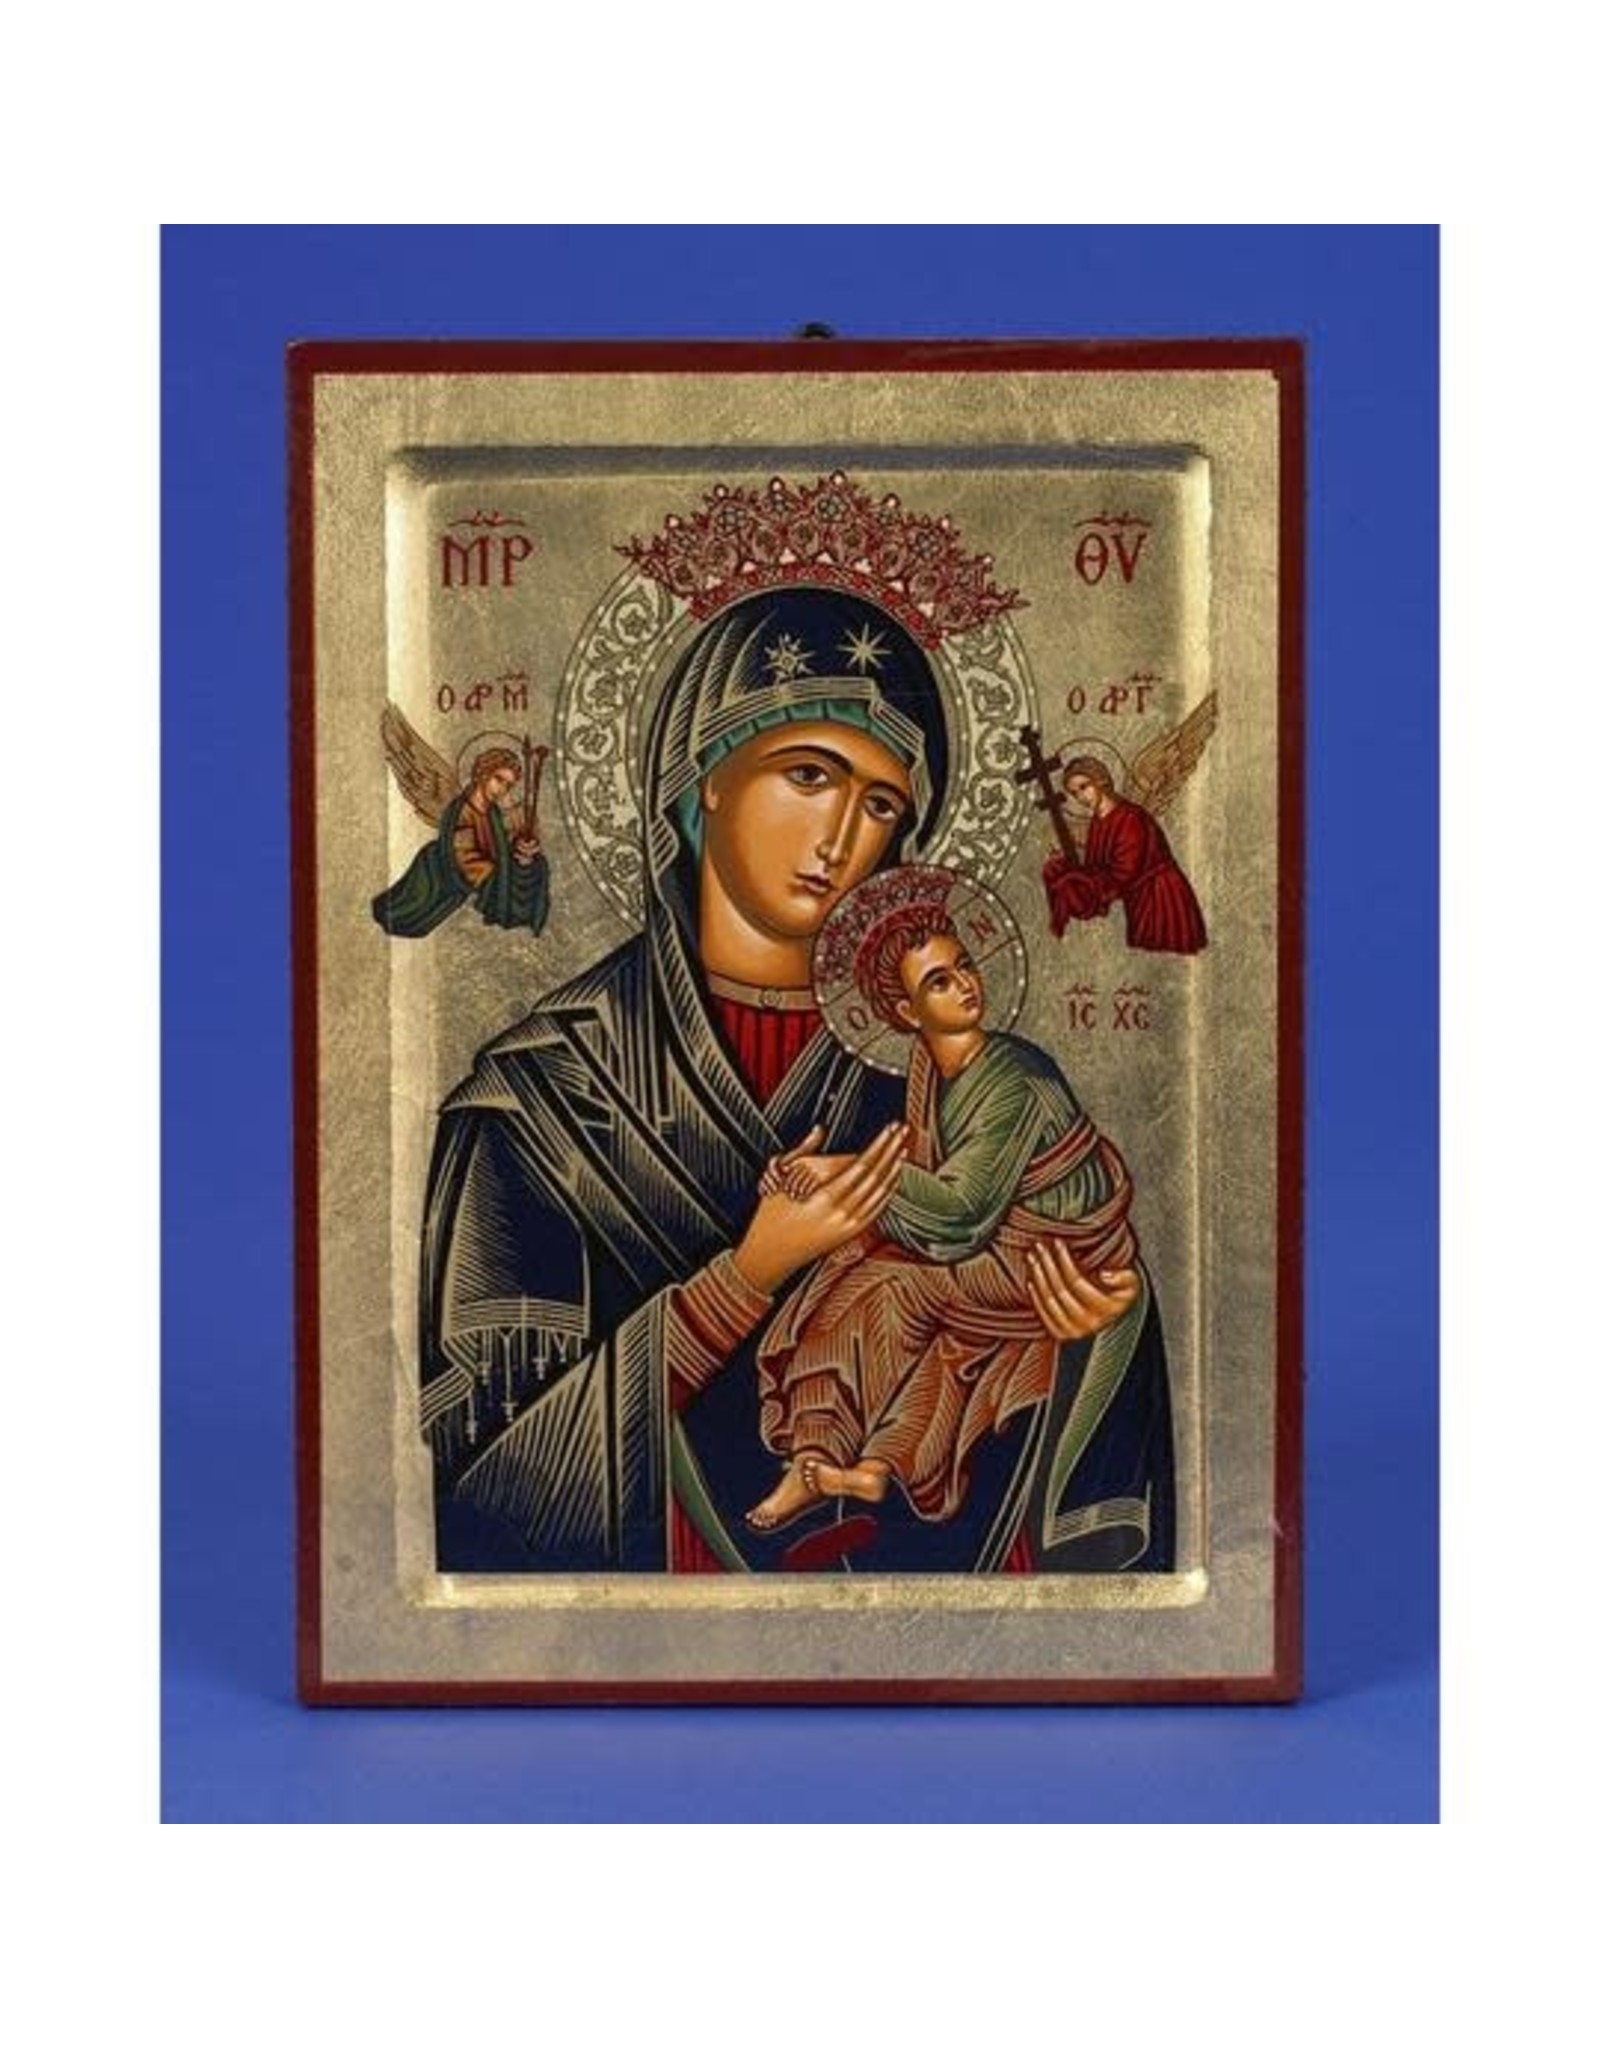 Lumen Mundi Our Lady of Perpetual Help Hand Painted Icon Made in Greece,5.5" x 7" x 1"